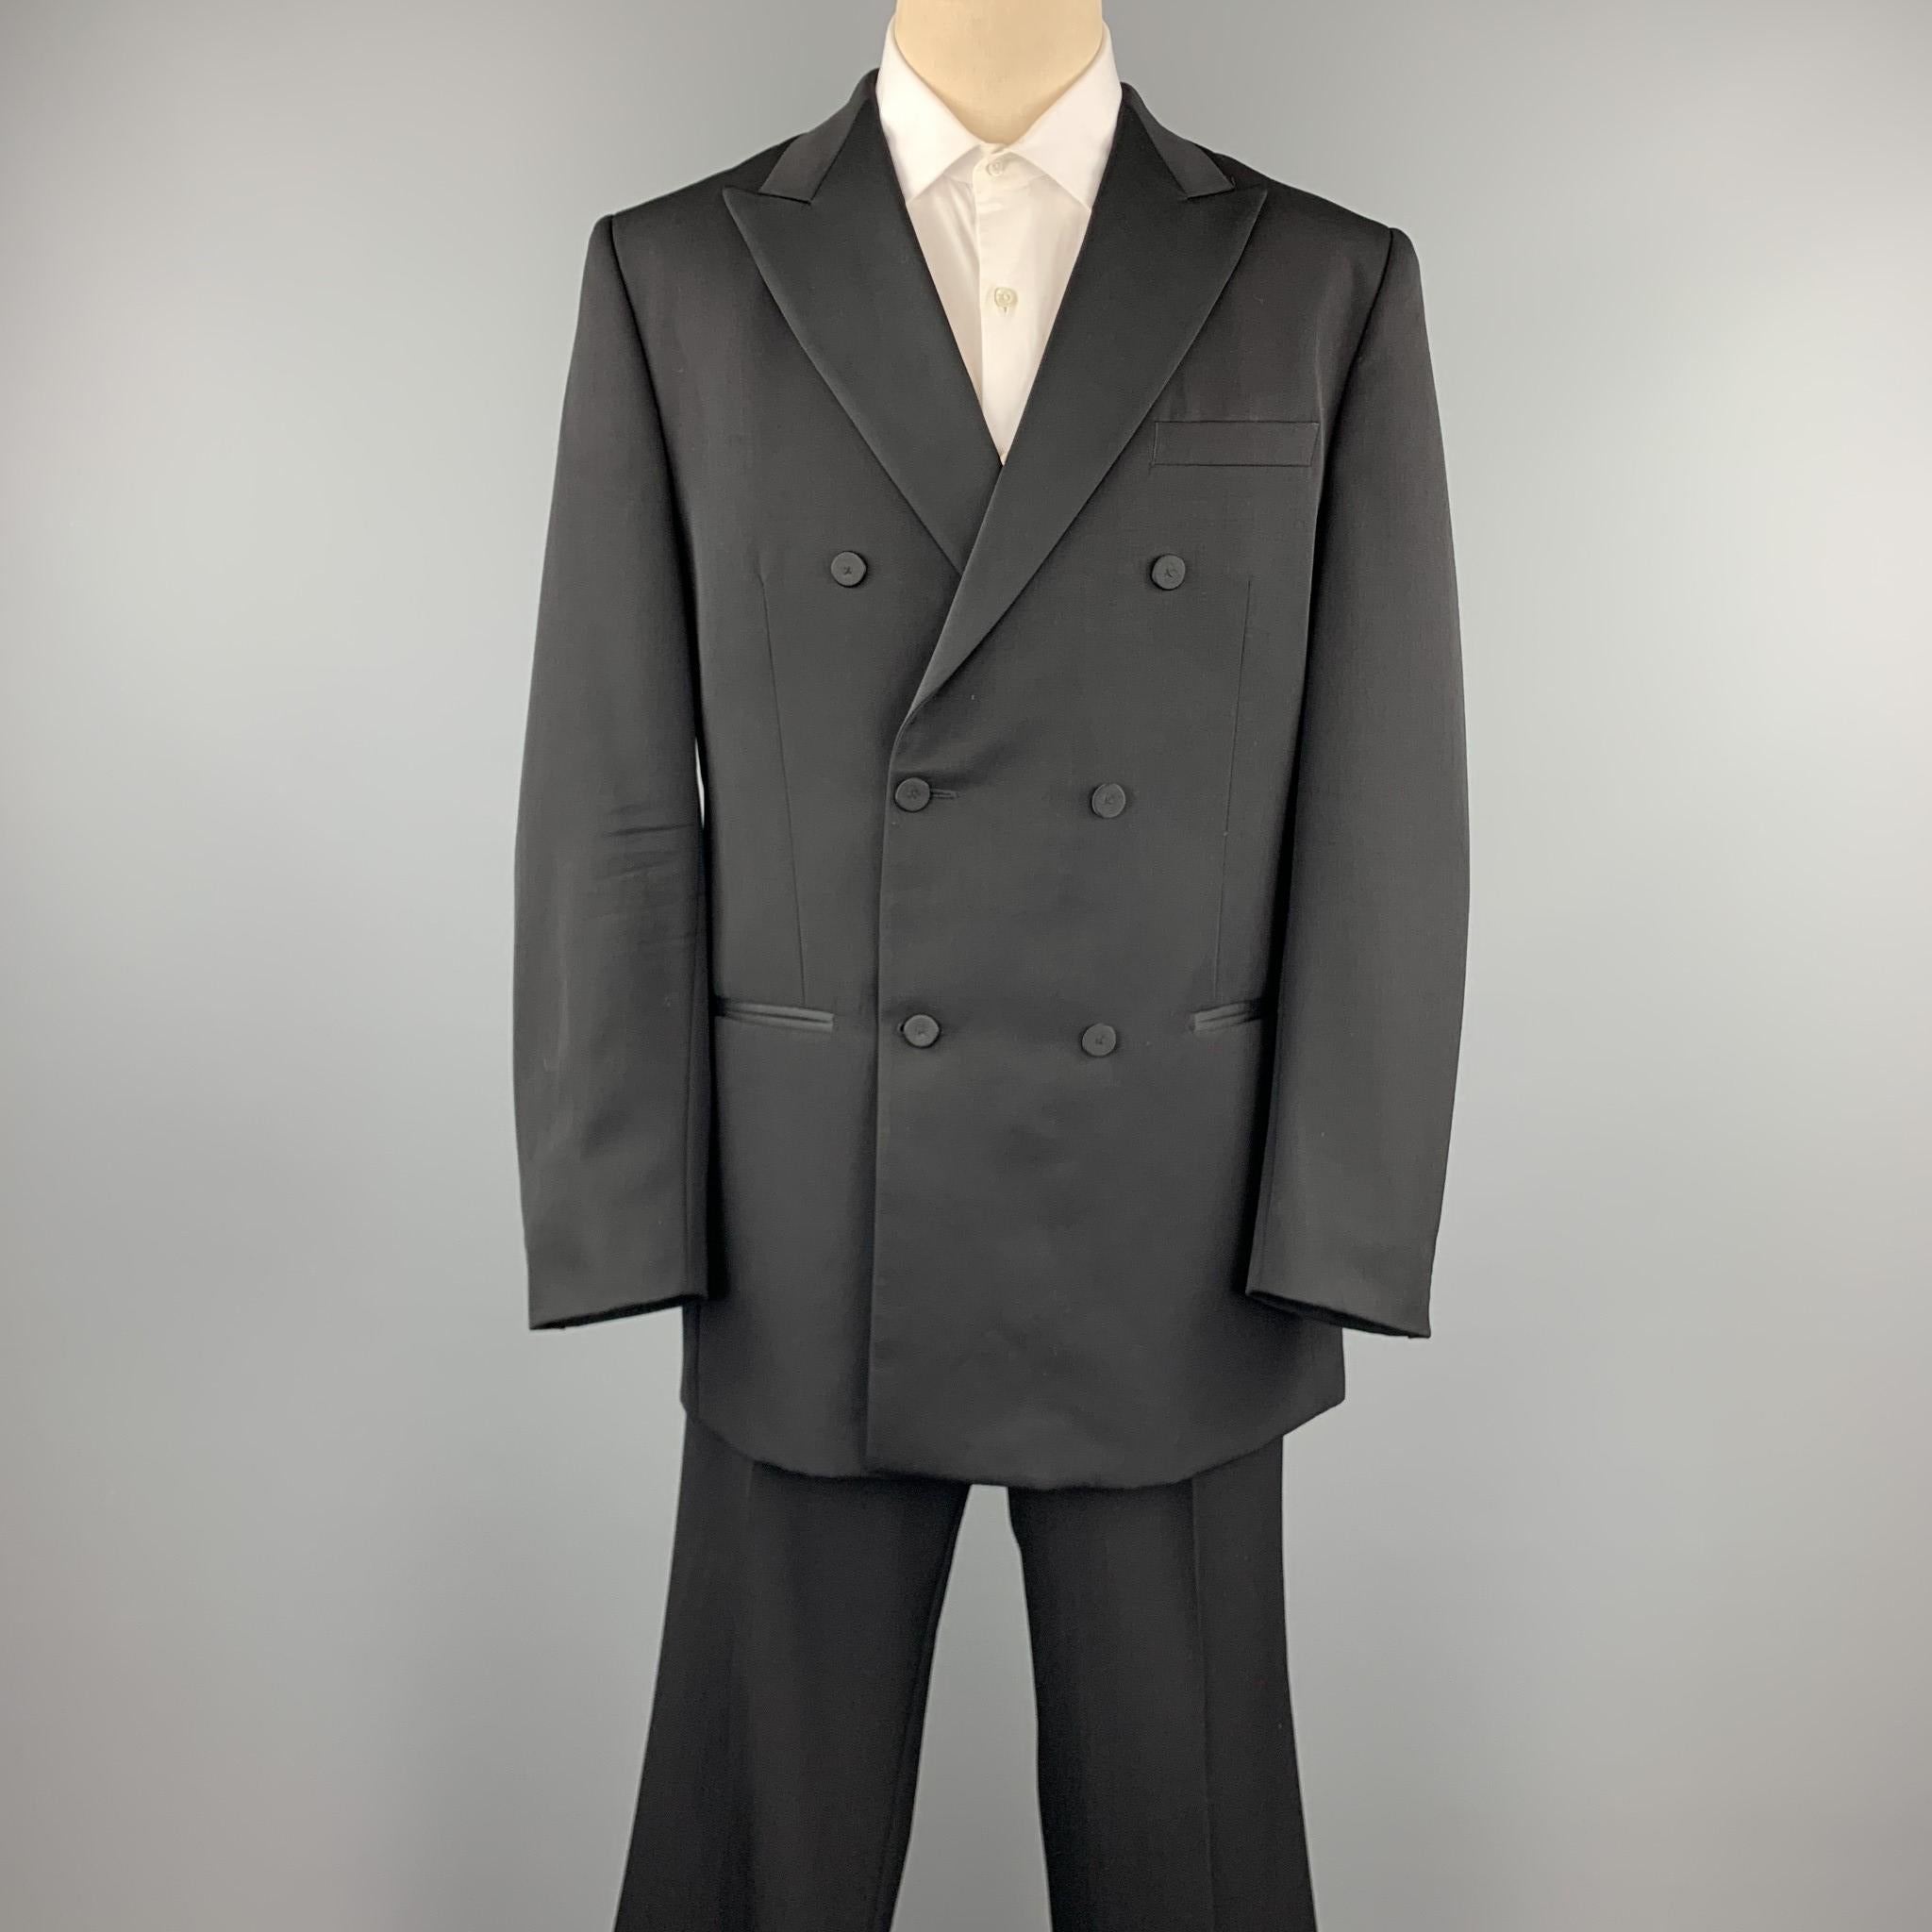 VALENTINO tuxedo suit comes in a black wool and includes a double breasted button sport coat with a peak lapel and matching flat front trousers. Made in Italy.

Very Good Pre-Owned Condition.
Marked: IT 56

Measurements:

-Jacket
Shoulder: 19 in.